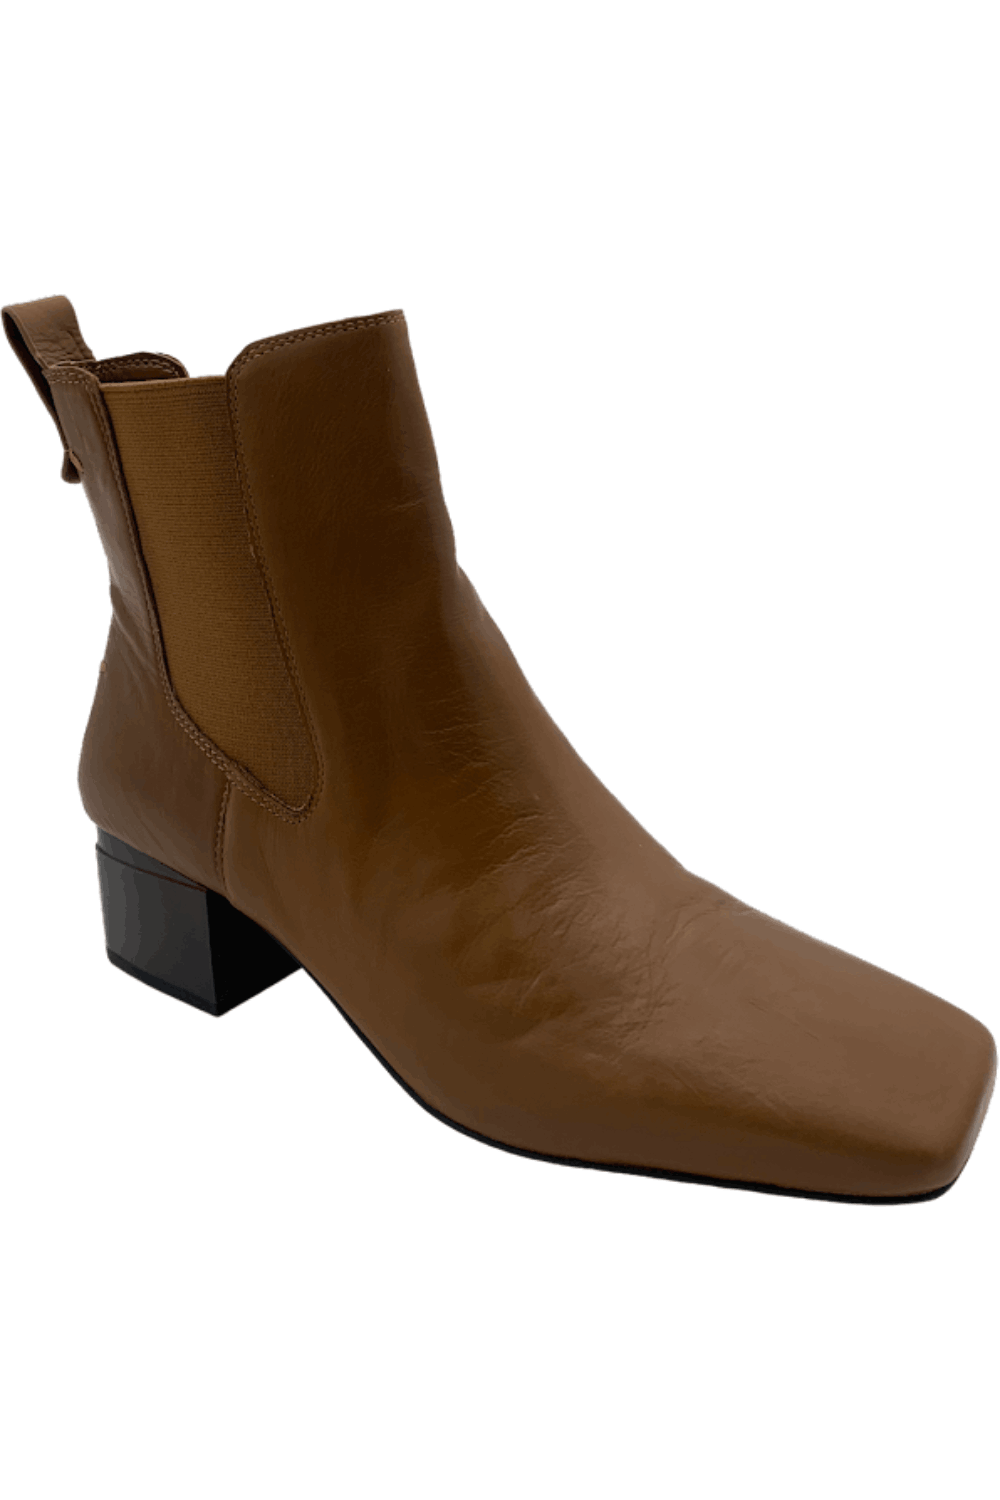 Vince Camuto Leather or Suede Ankle Boots - Zeorsch